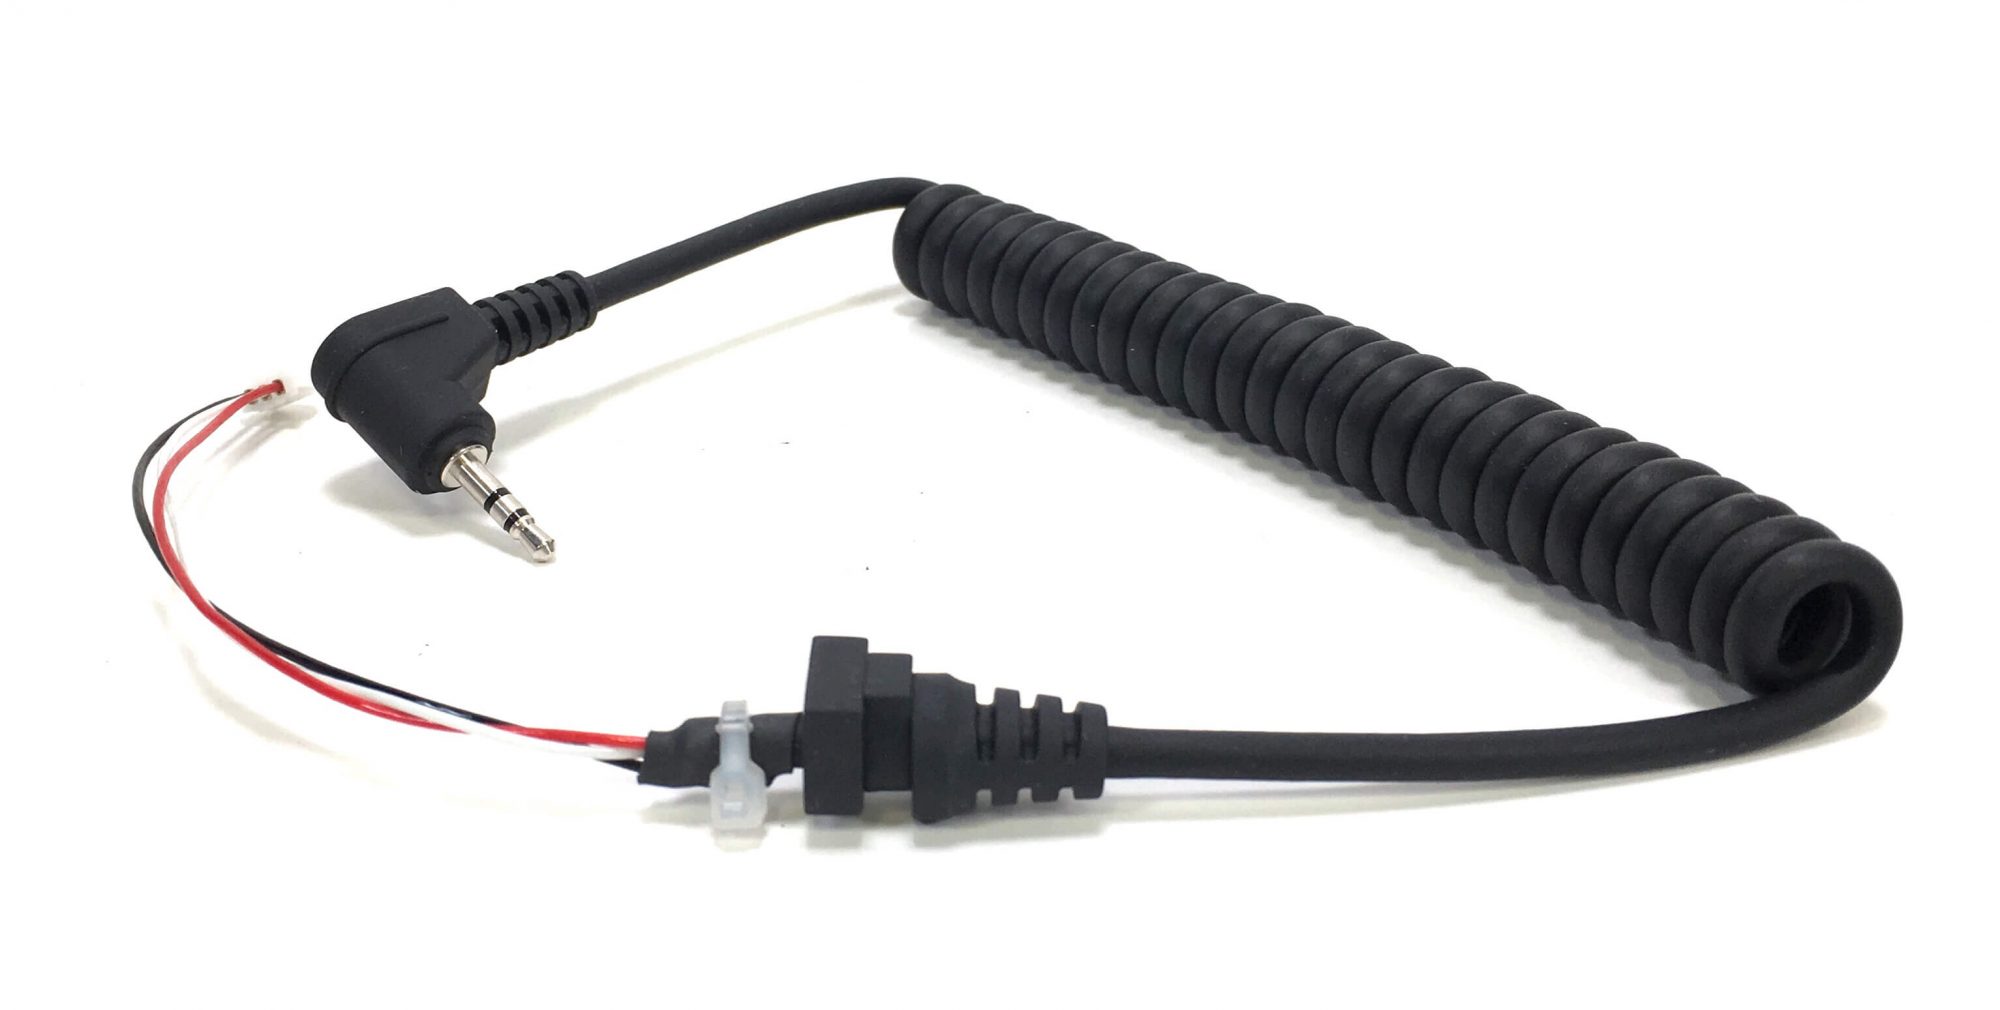 Original Grip Cable that fits on the Sony PXW-FS7 camcorder. It is a genuine Sony part, sourced directly from Sony USA. Brand new factory fresh. Free Shipping.